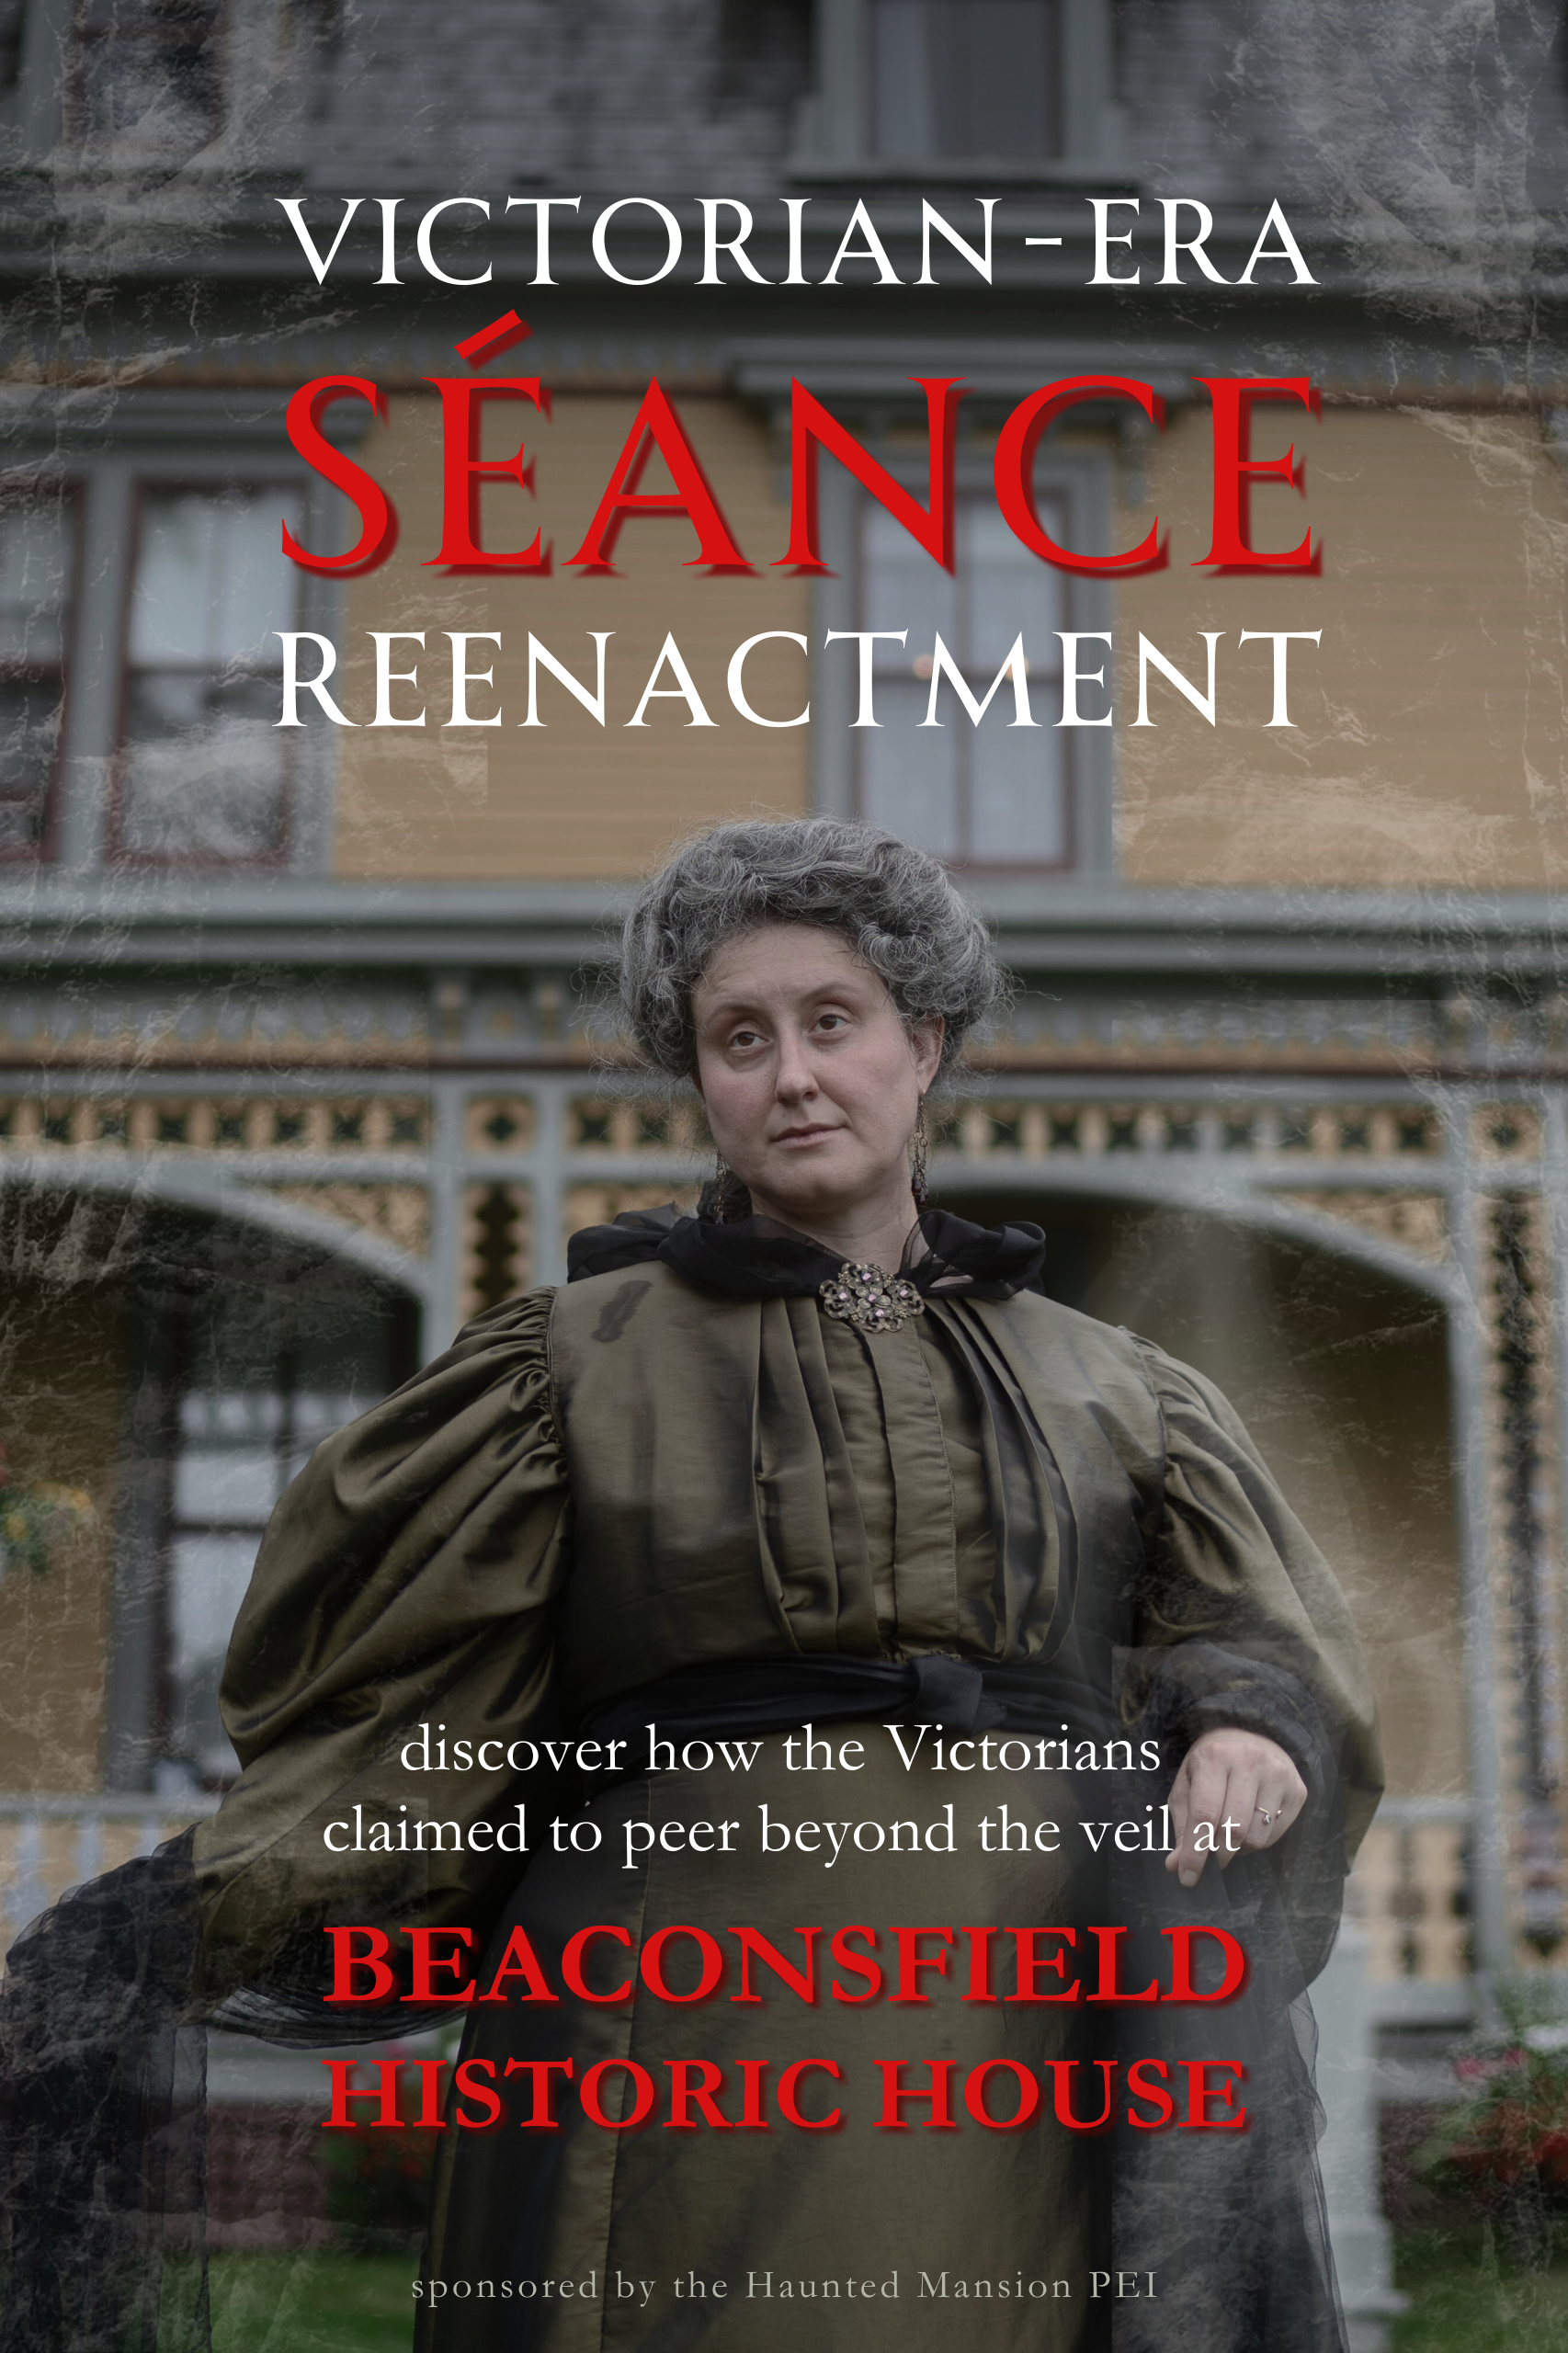 Poster of Beaconsfield Seance Program, featuring the medium Evangeline Grey standing in the garden of Beaconsfield Historic House